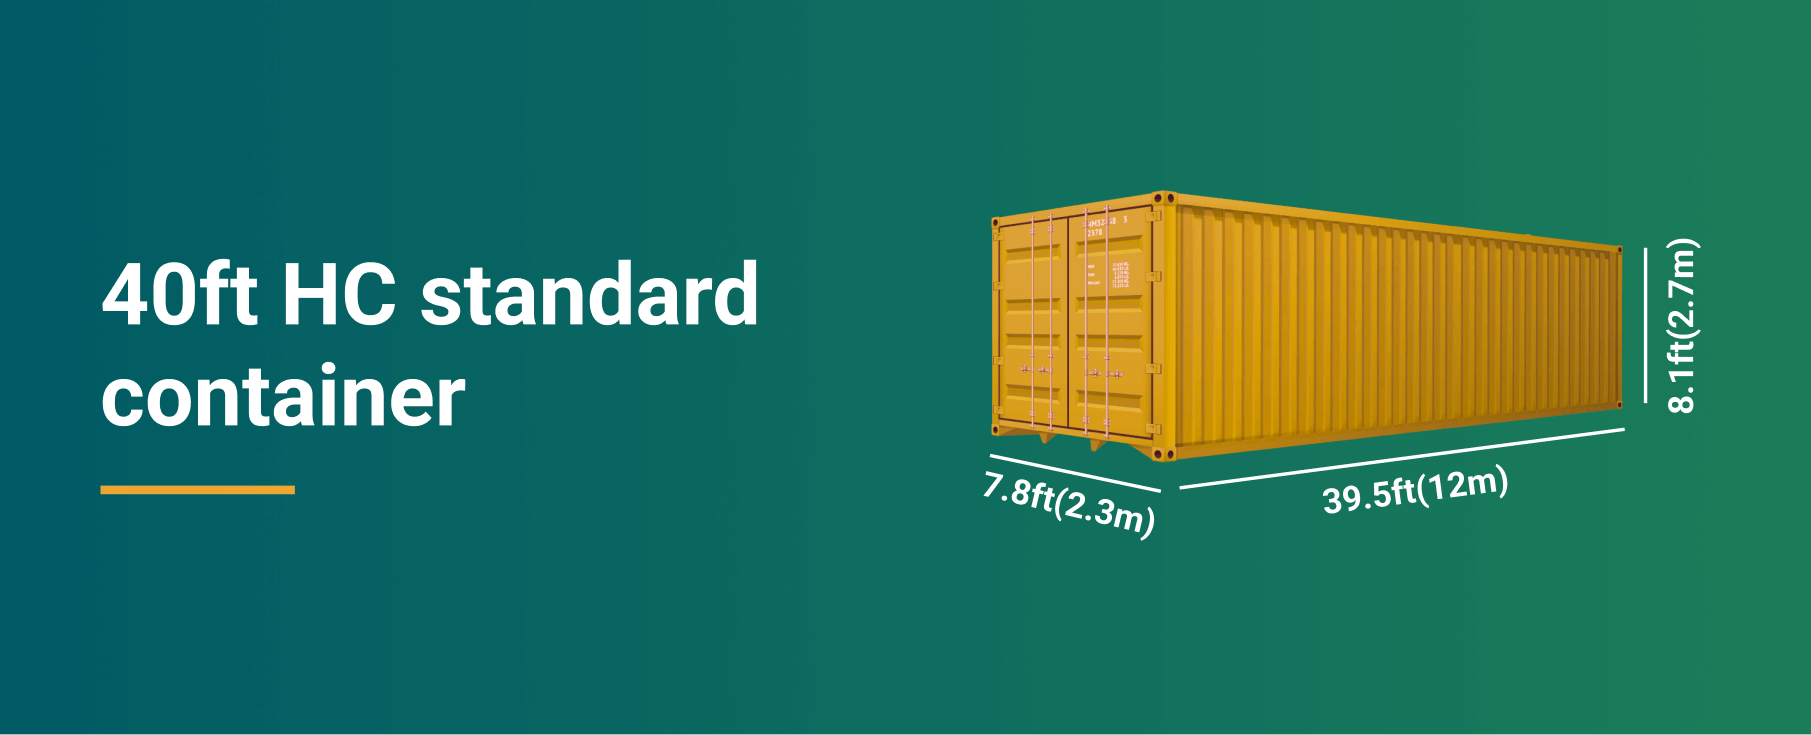 40ft hc standard container dimensions